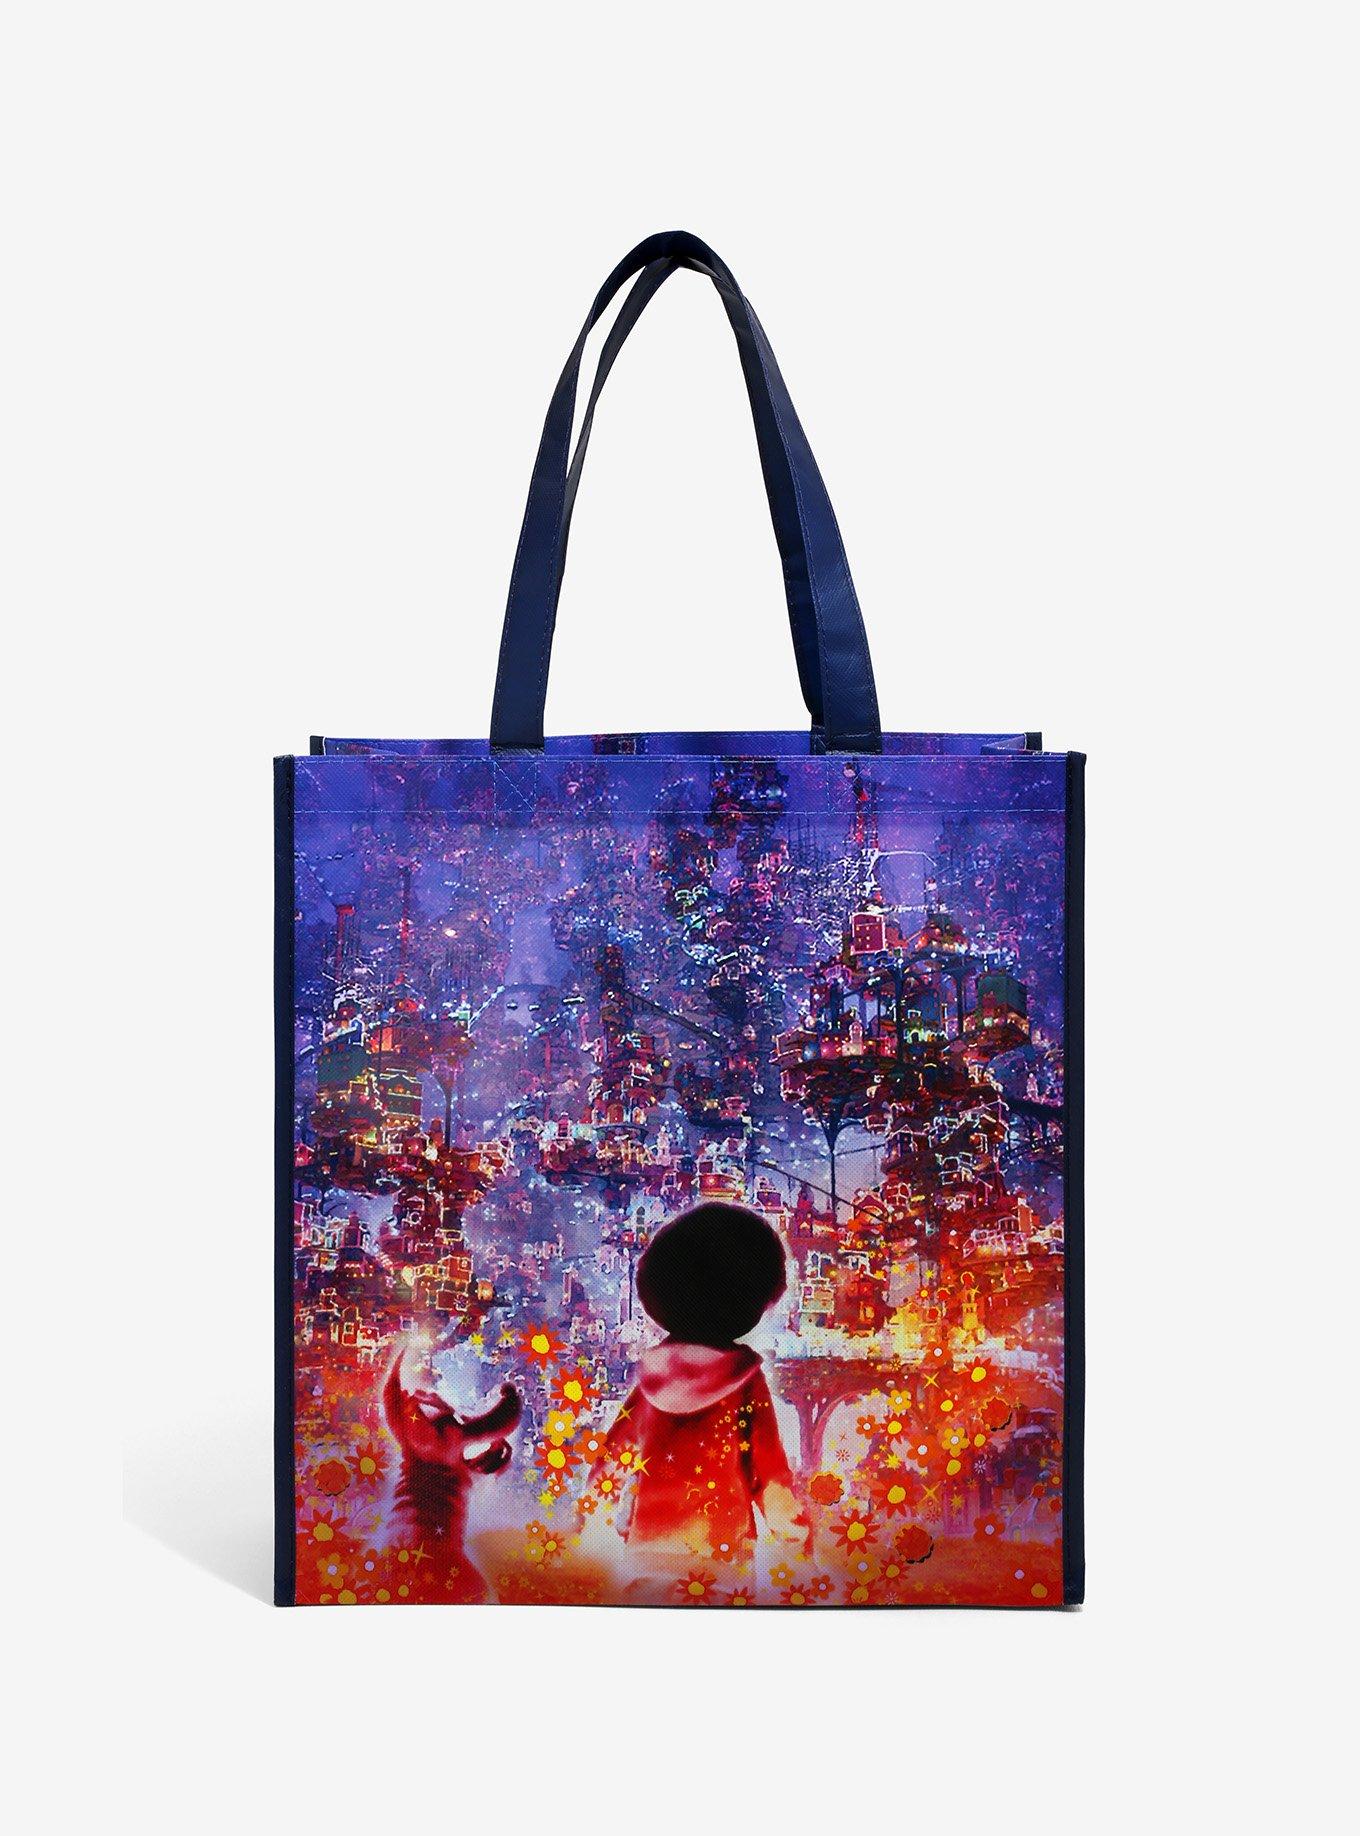 Loungefly Disney Pixar Coco Reusable Tote - BoxLunch Exclusive, , alternate